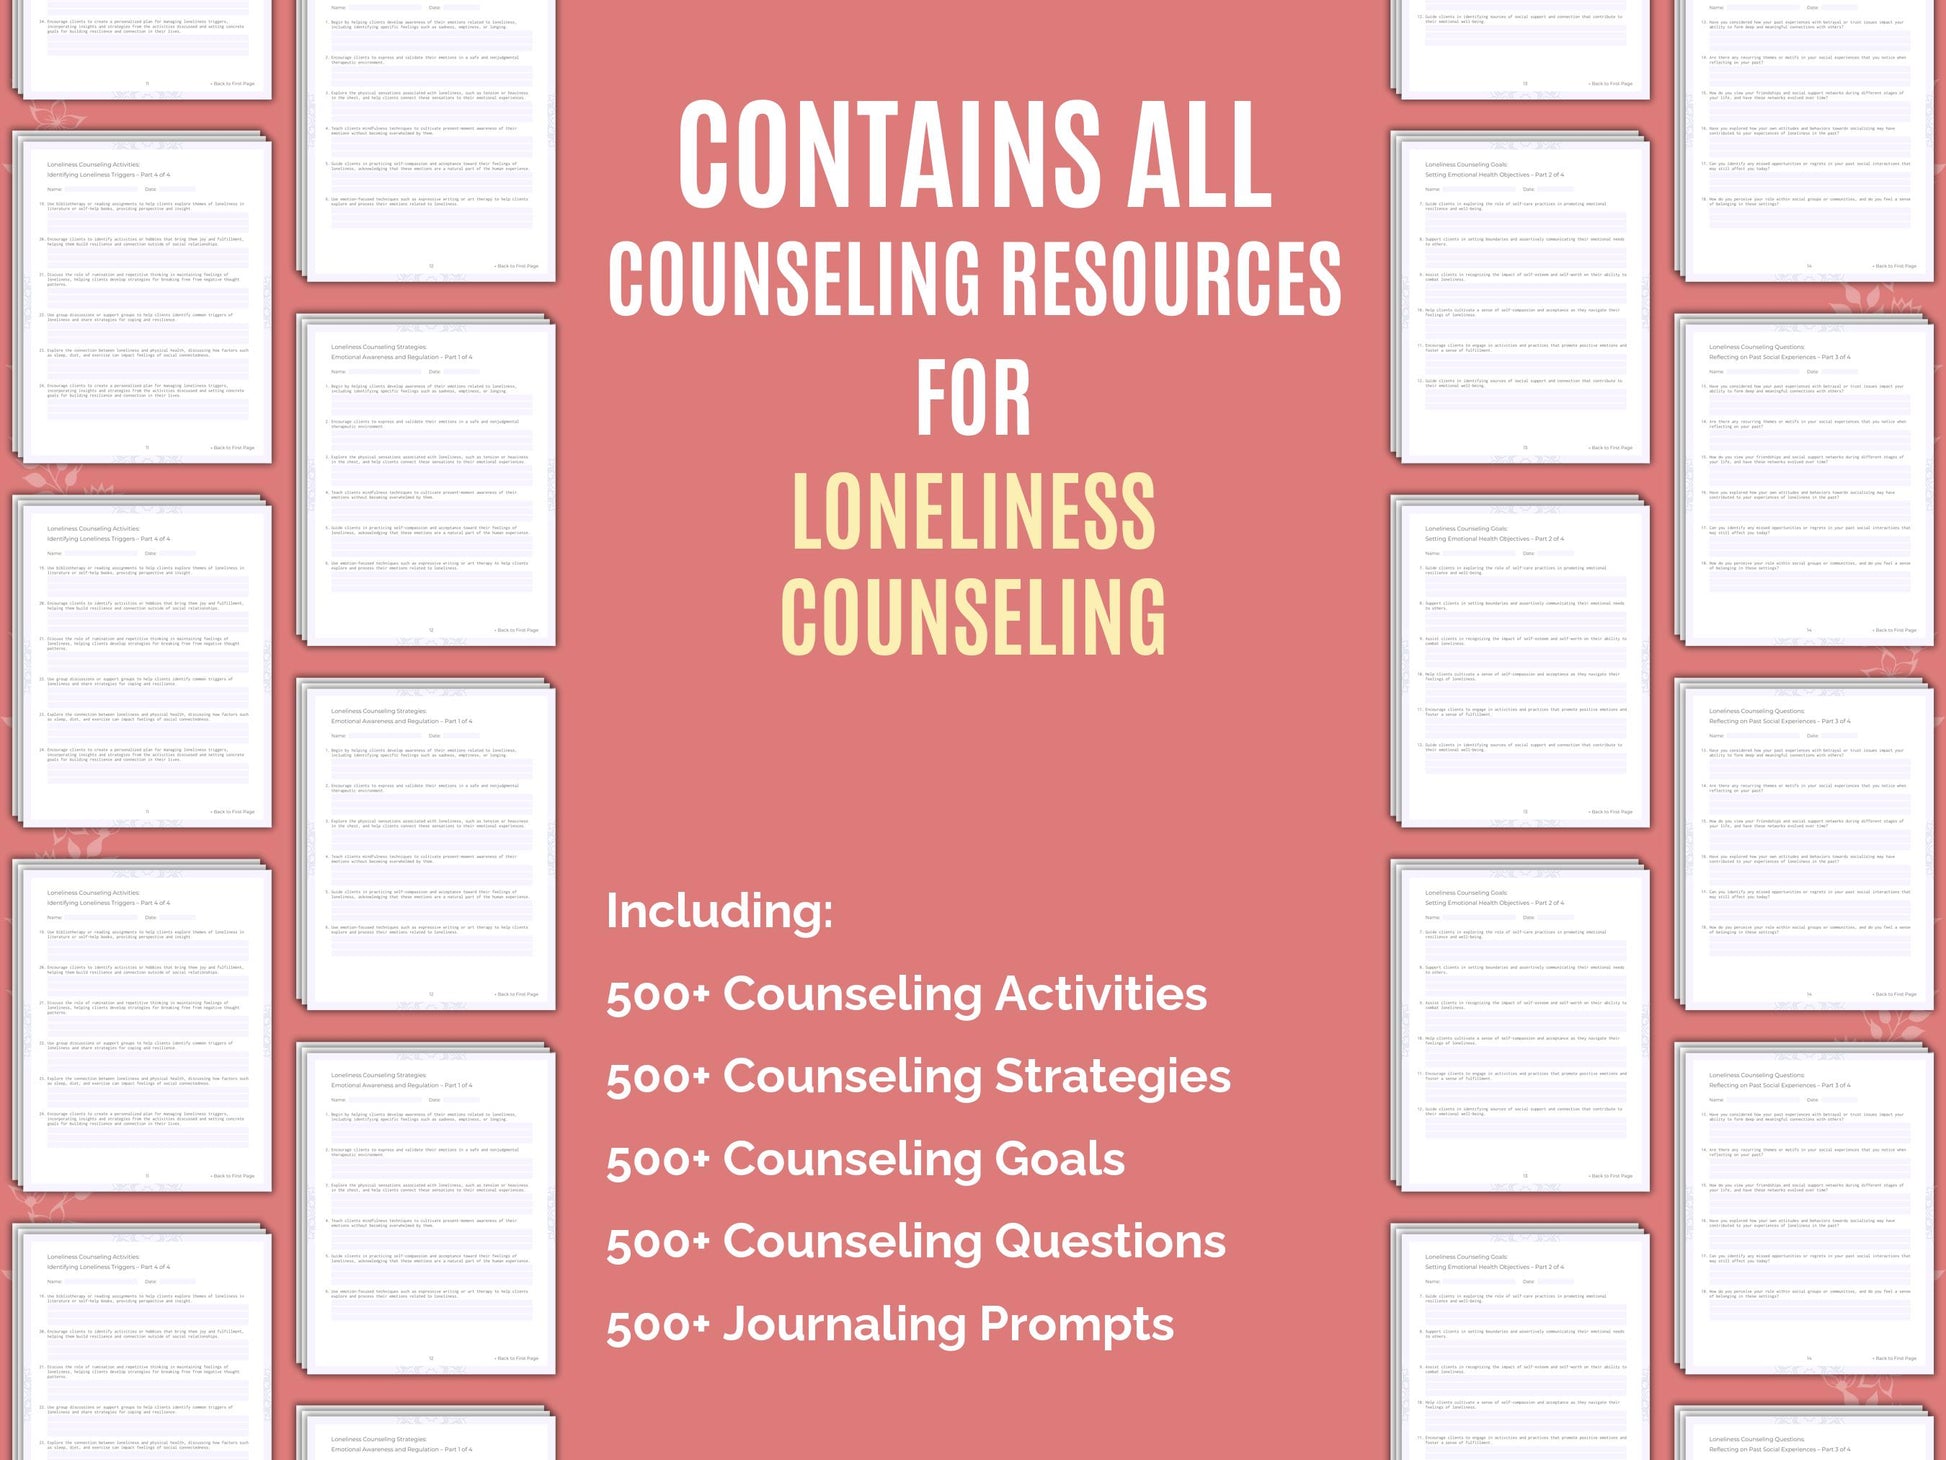 Counseling, Mental Health, Loneliness, Loneliness Bundle, Loneliness Worksheet, Loneliness Tool, Loneliness Template, Loneliness Idea, Loneliness Workbook, Counselor, Loneliness Resource, Loneliness Therapy, Therapist